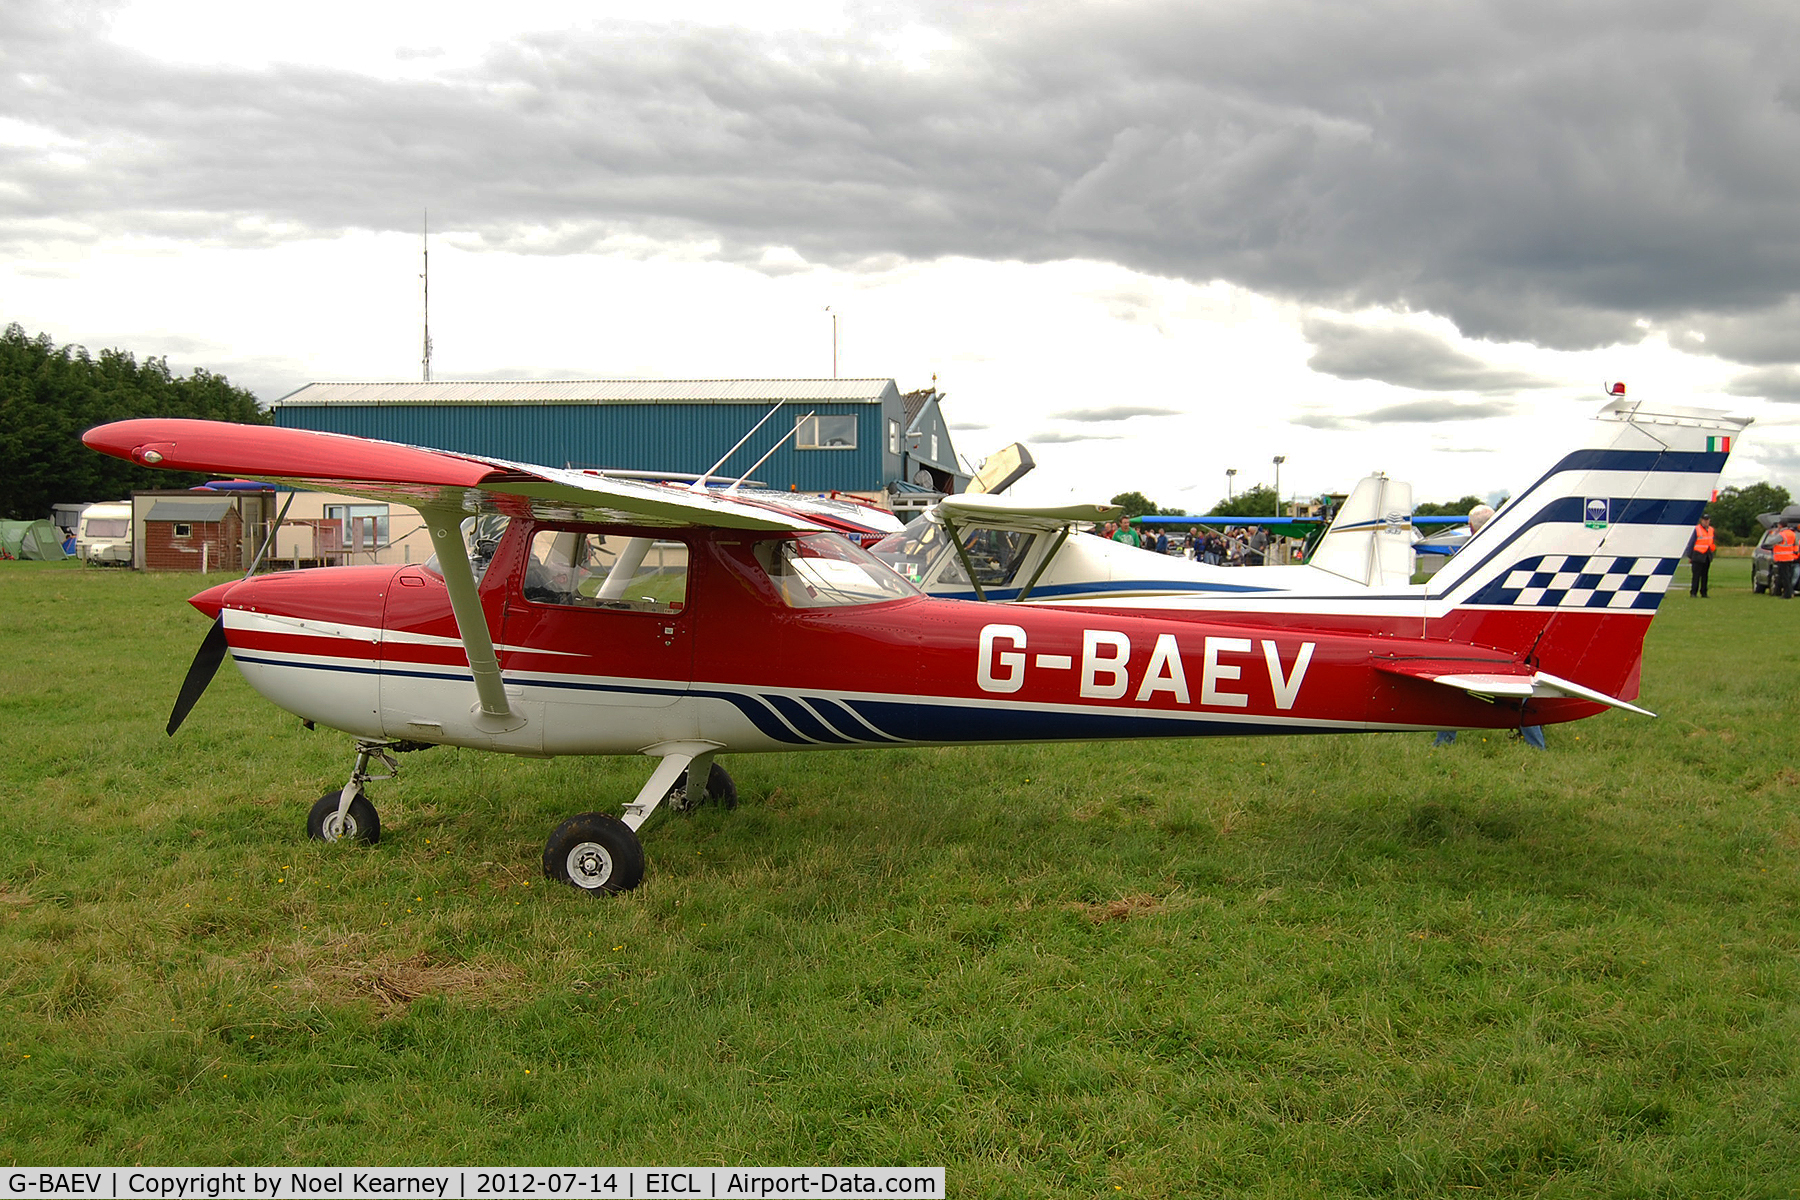 G-BAEV, 1972 Reims FRA150L Aerobat C/N 0173, On display at the Clonbullogue Fly-in July 2012